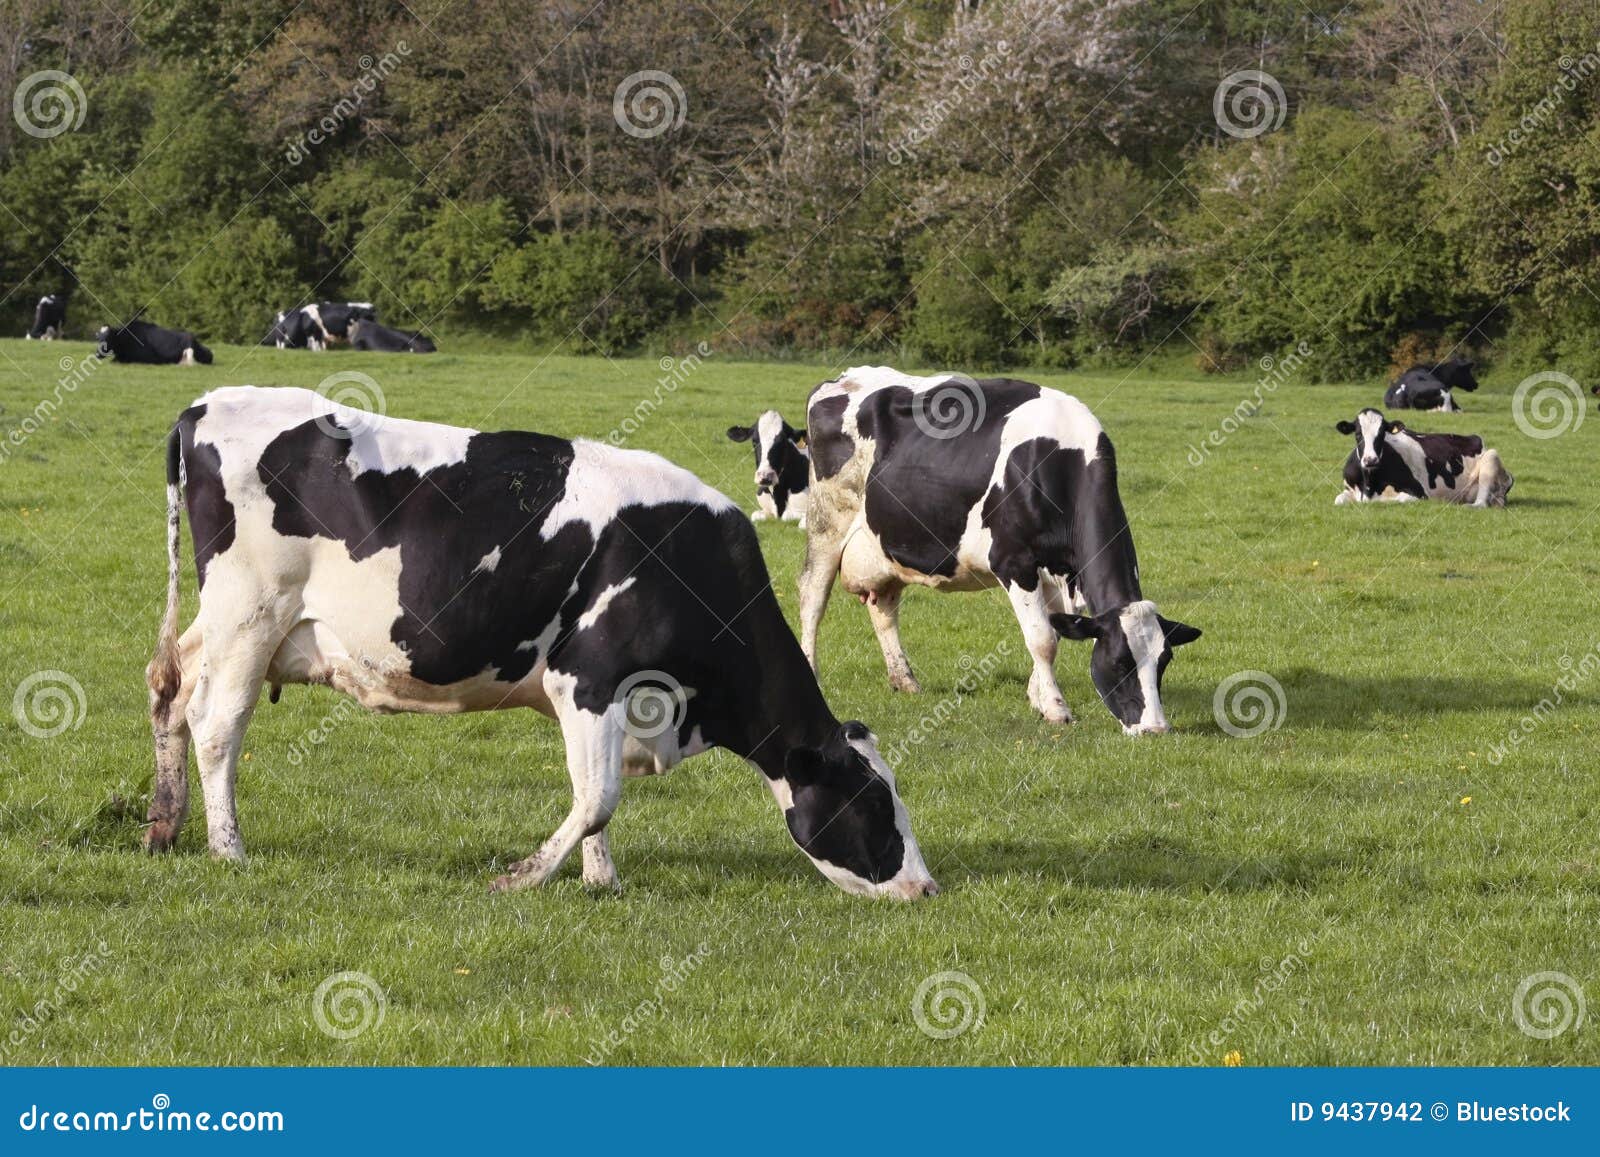 cow grazing clipart - photo #46